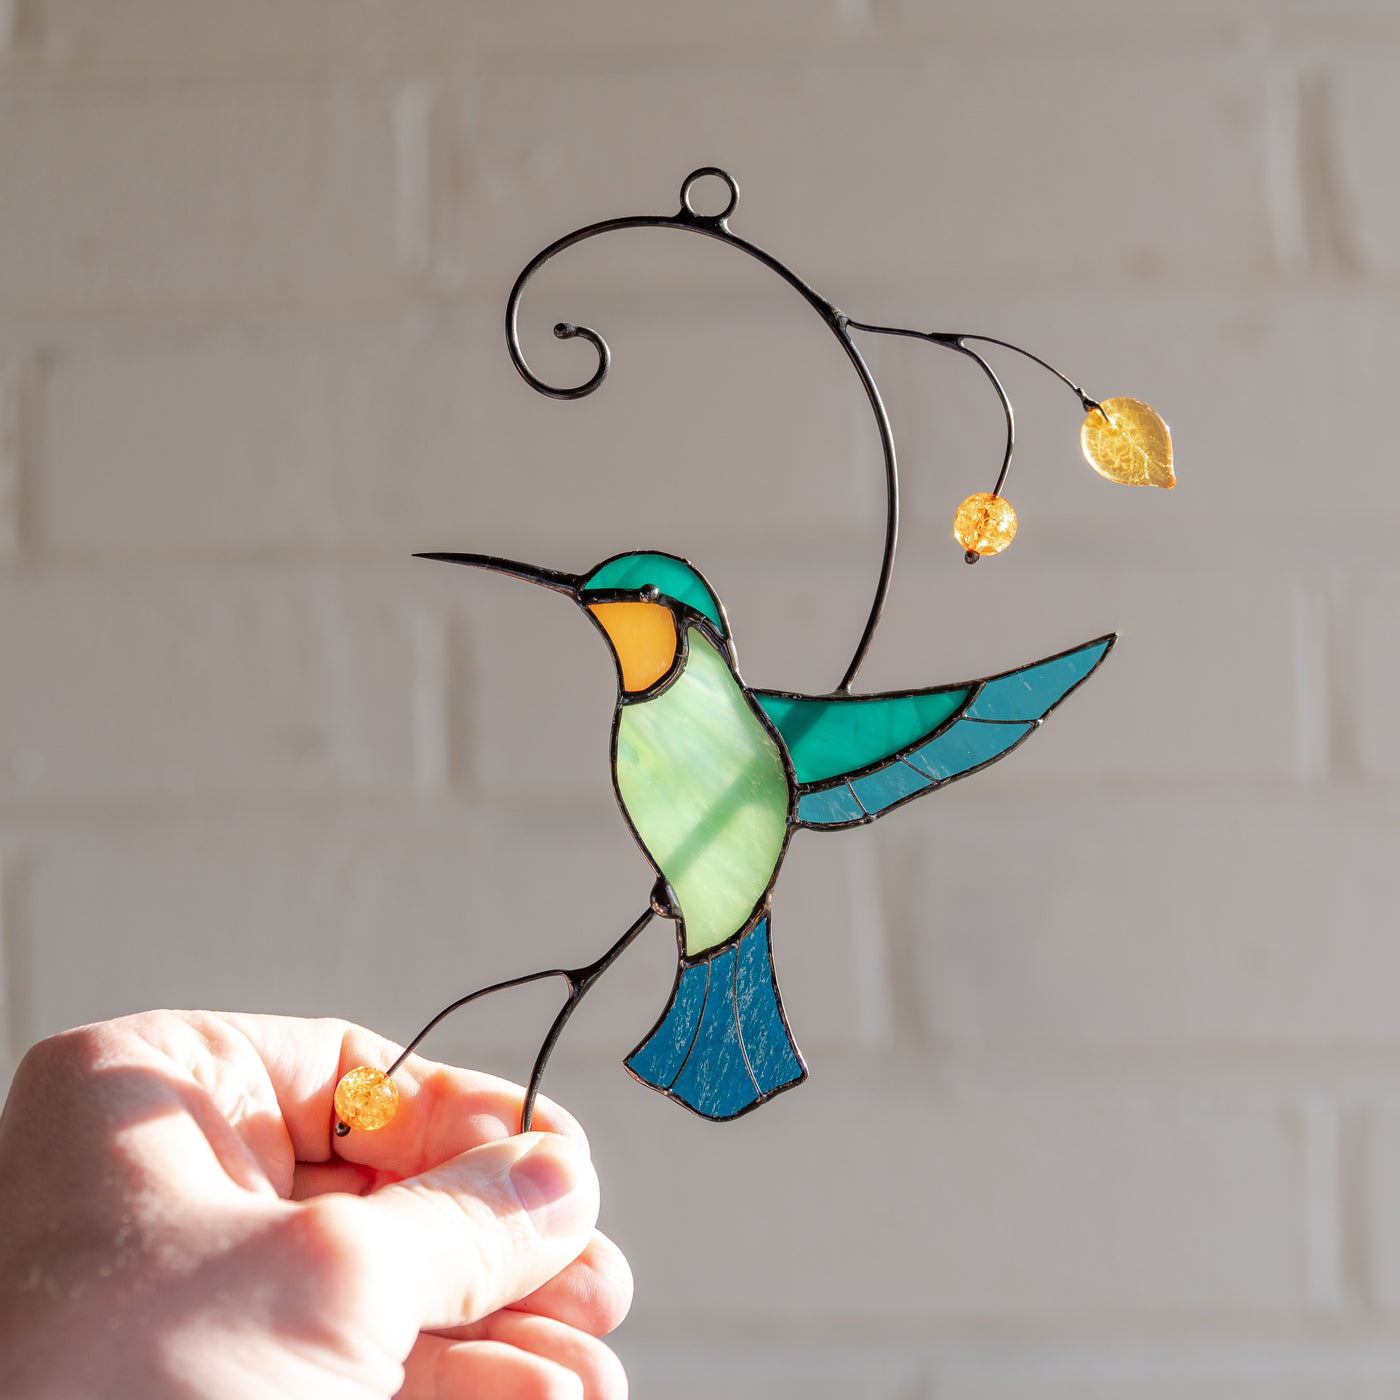 Suncatcher of a taking off the branch stained glass hummingbird